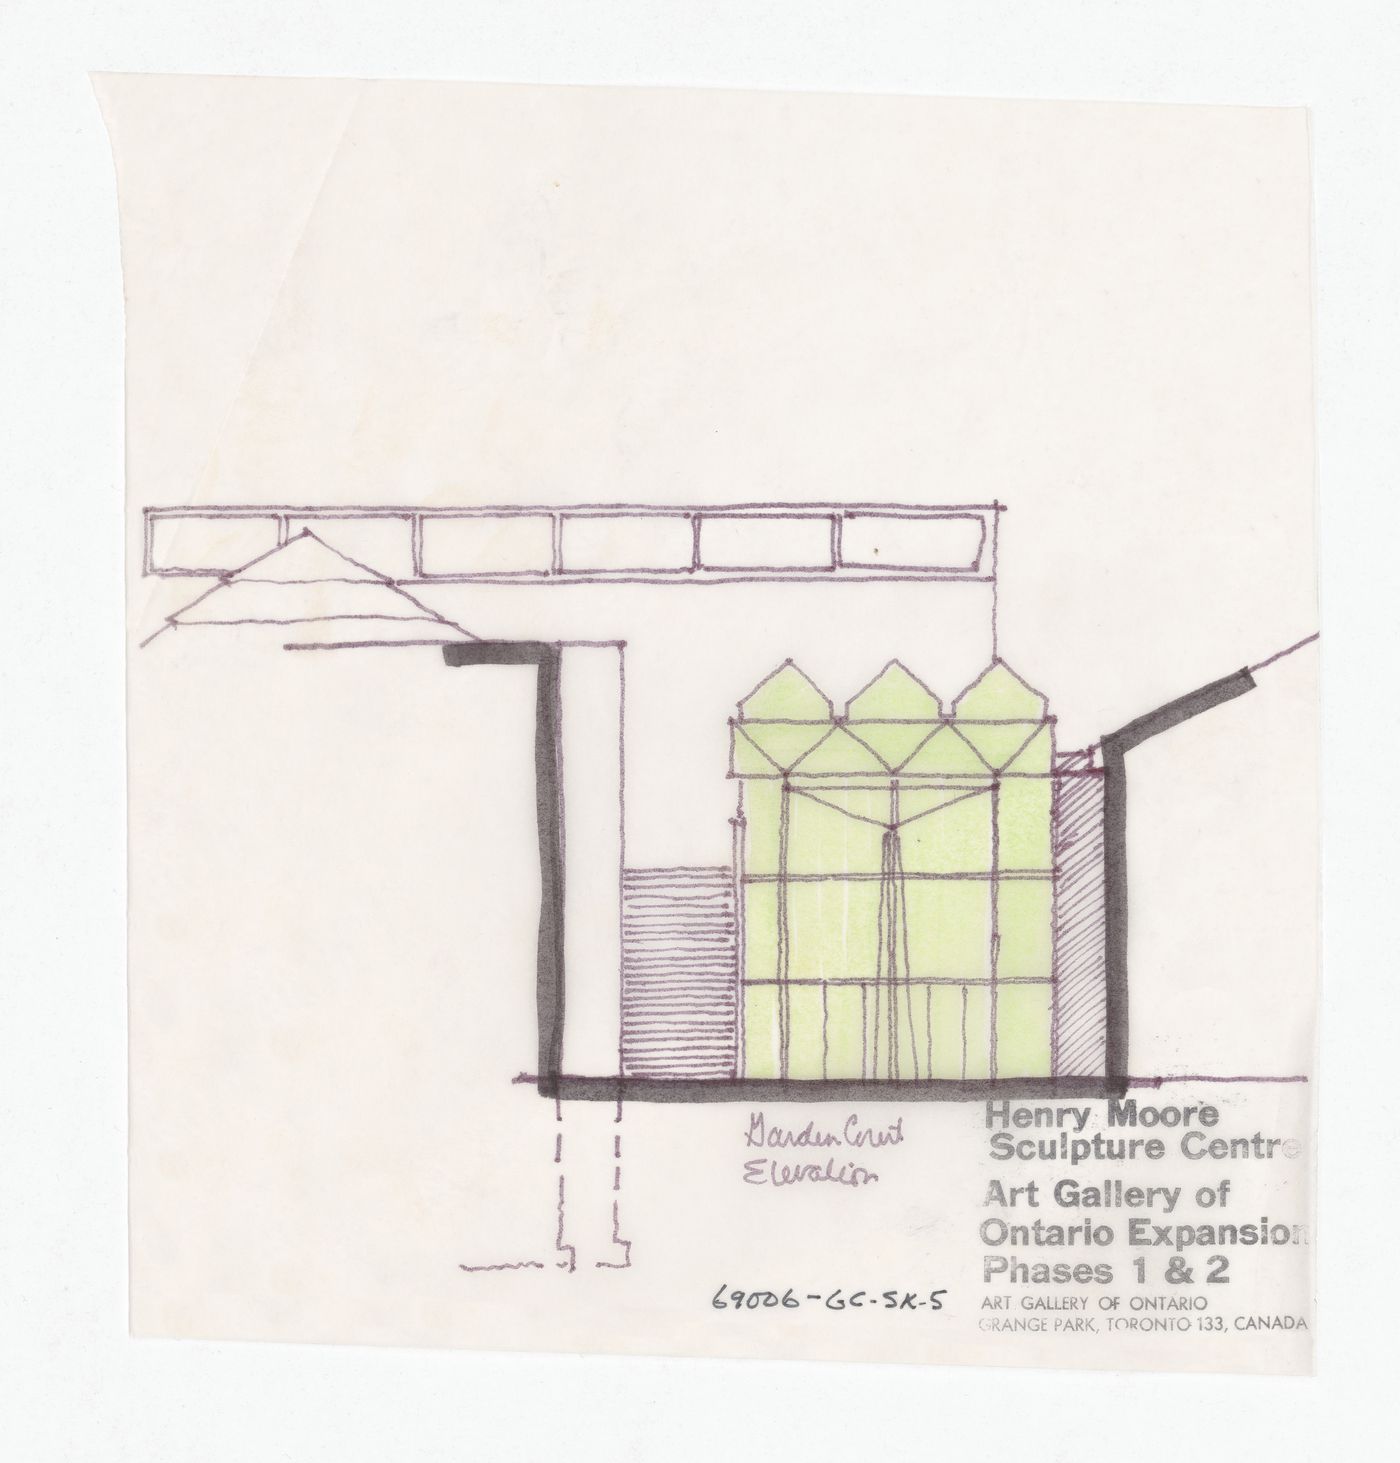 Elevation for Henry Moore Sculpture Centre, Art Gallery of Ontario, Stage I and II Expansion, Toronto